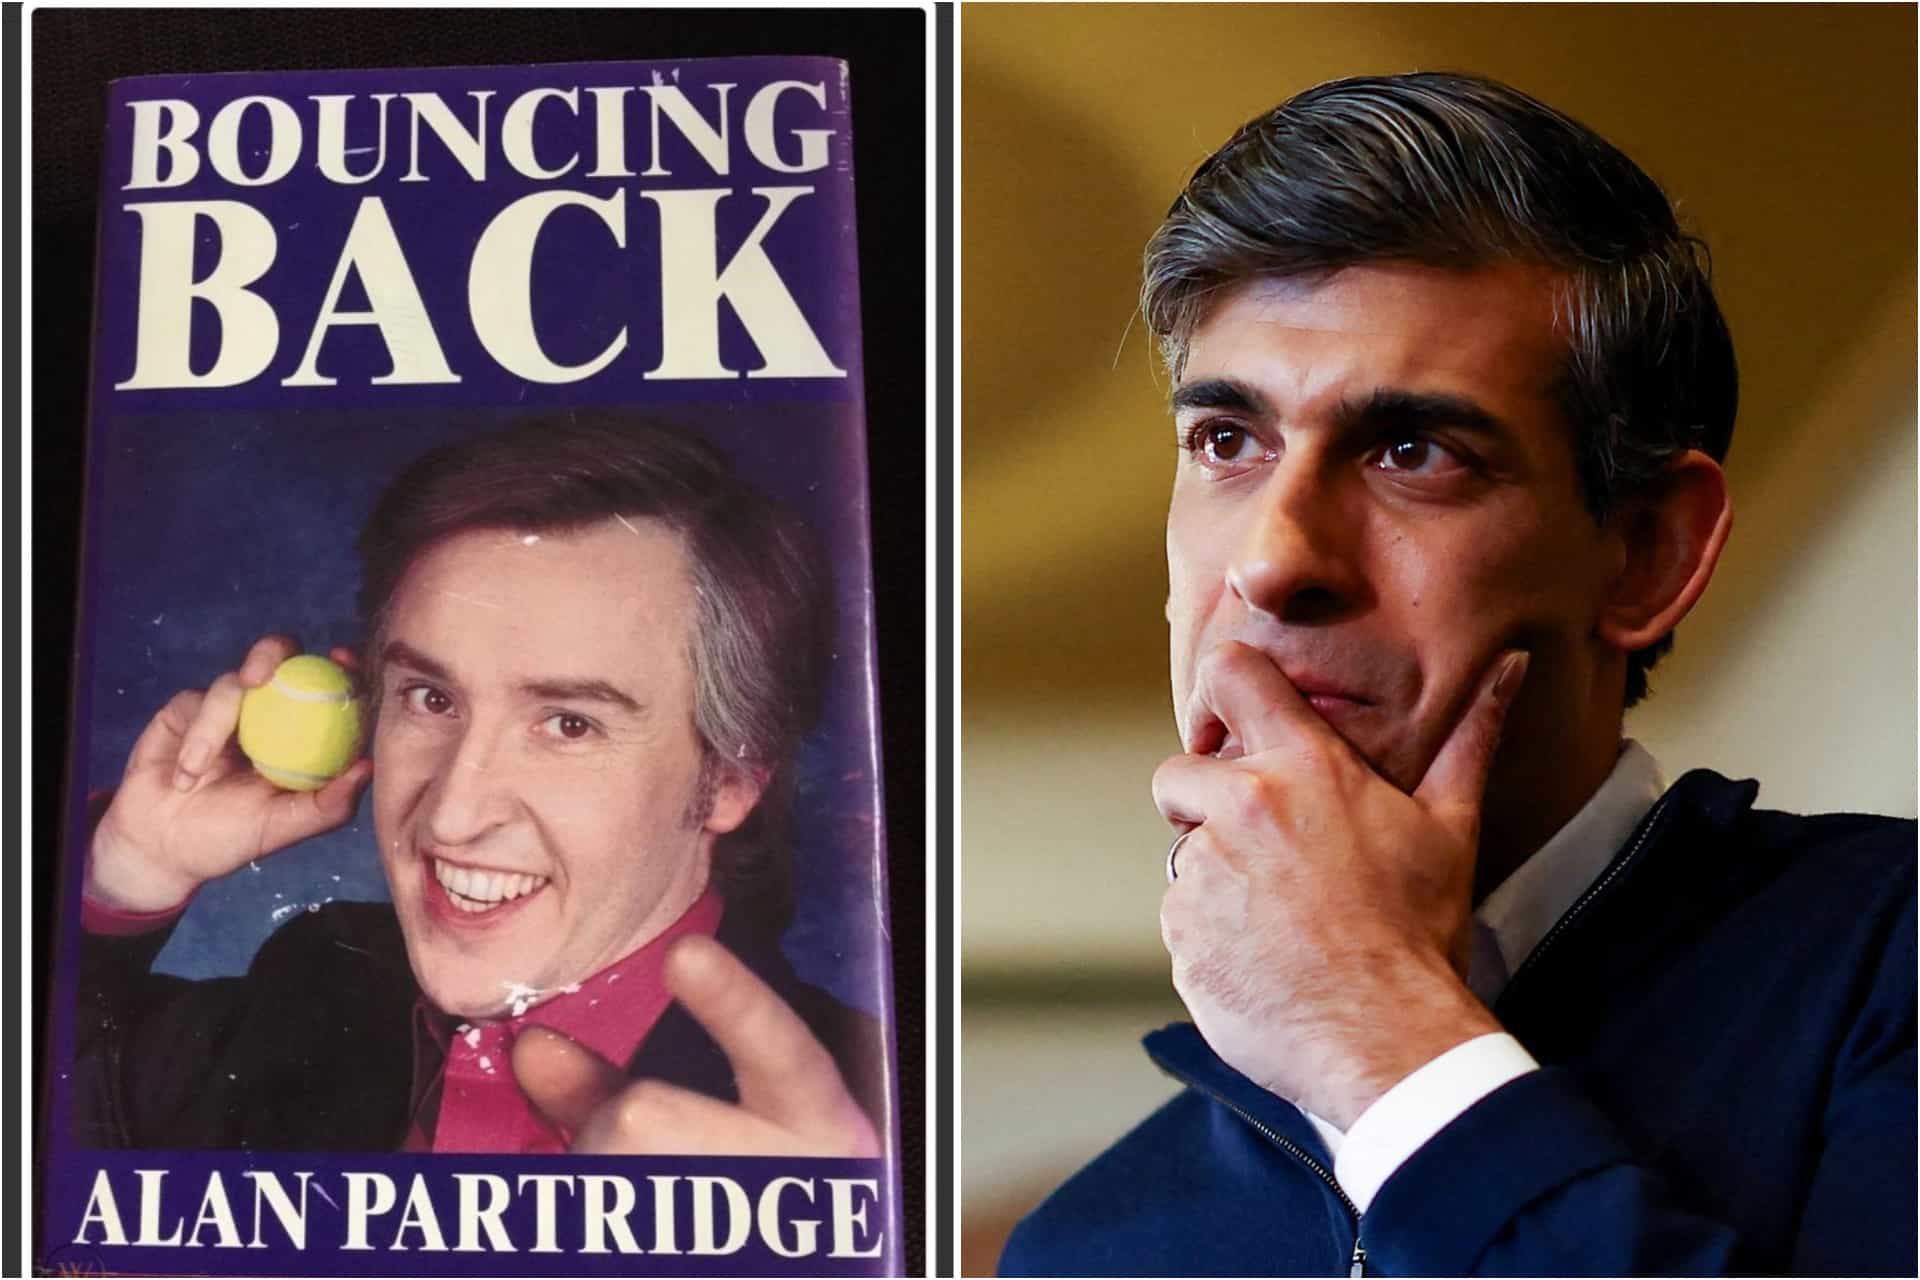 Tories circulate humiliating picture as Sunak says Britain is ‘bouncing back’